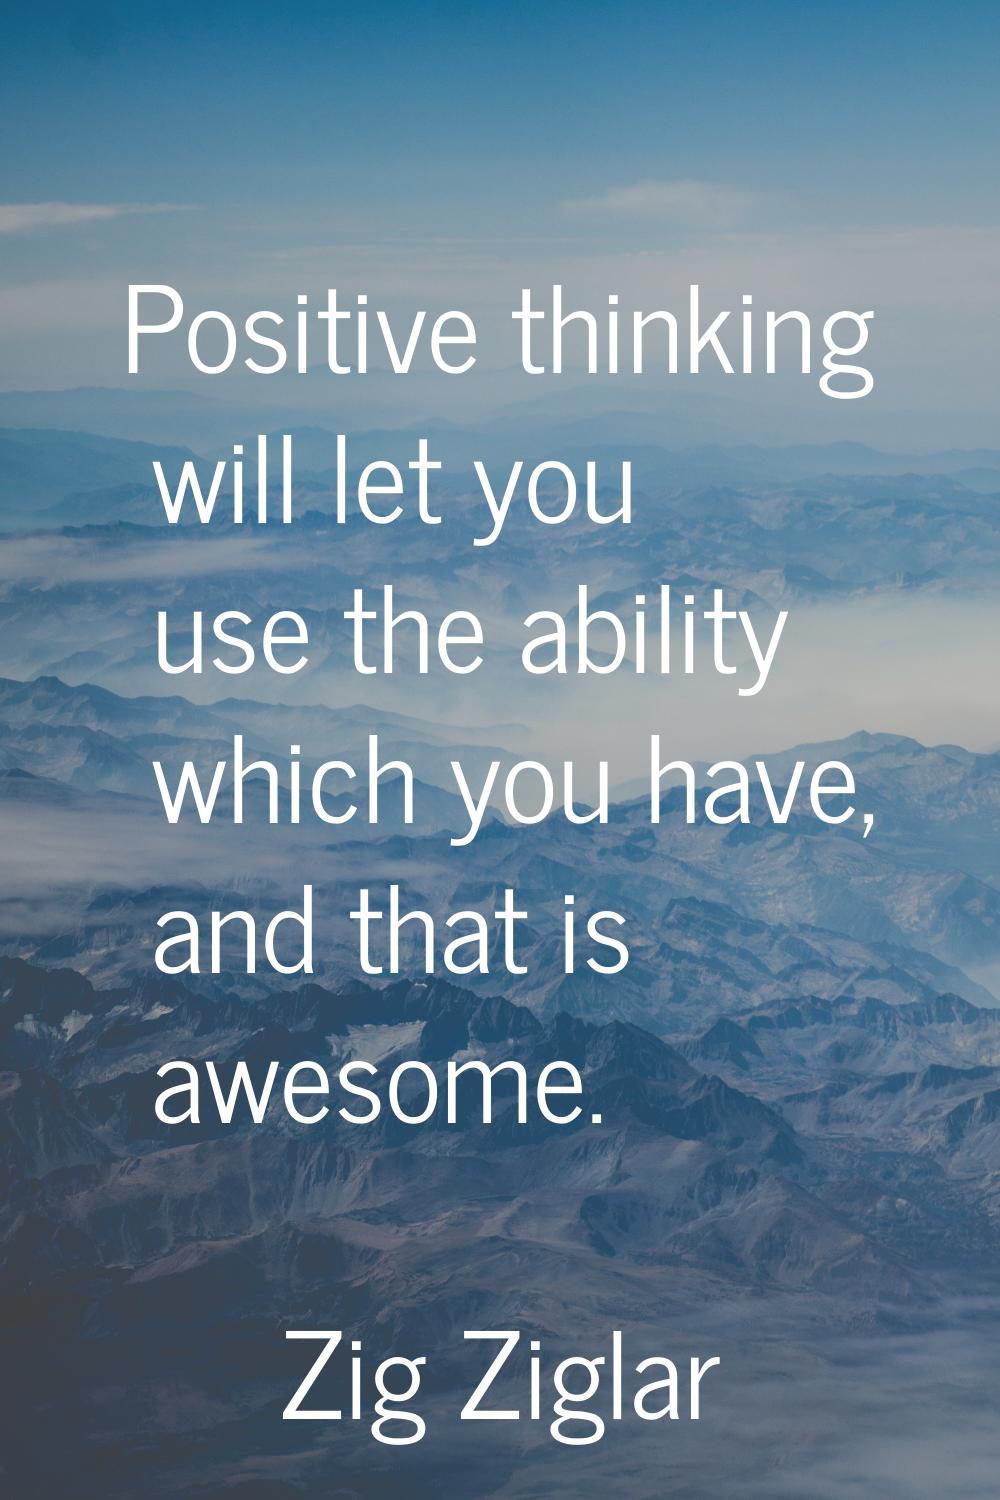 Positive thinking will let you use the ability which you have, and that is awesome.